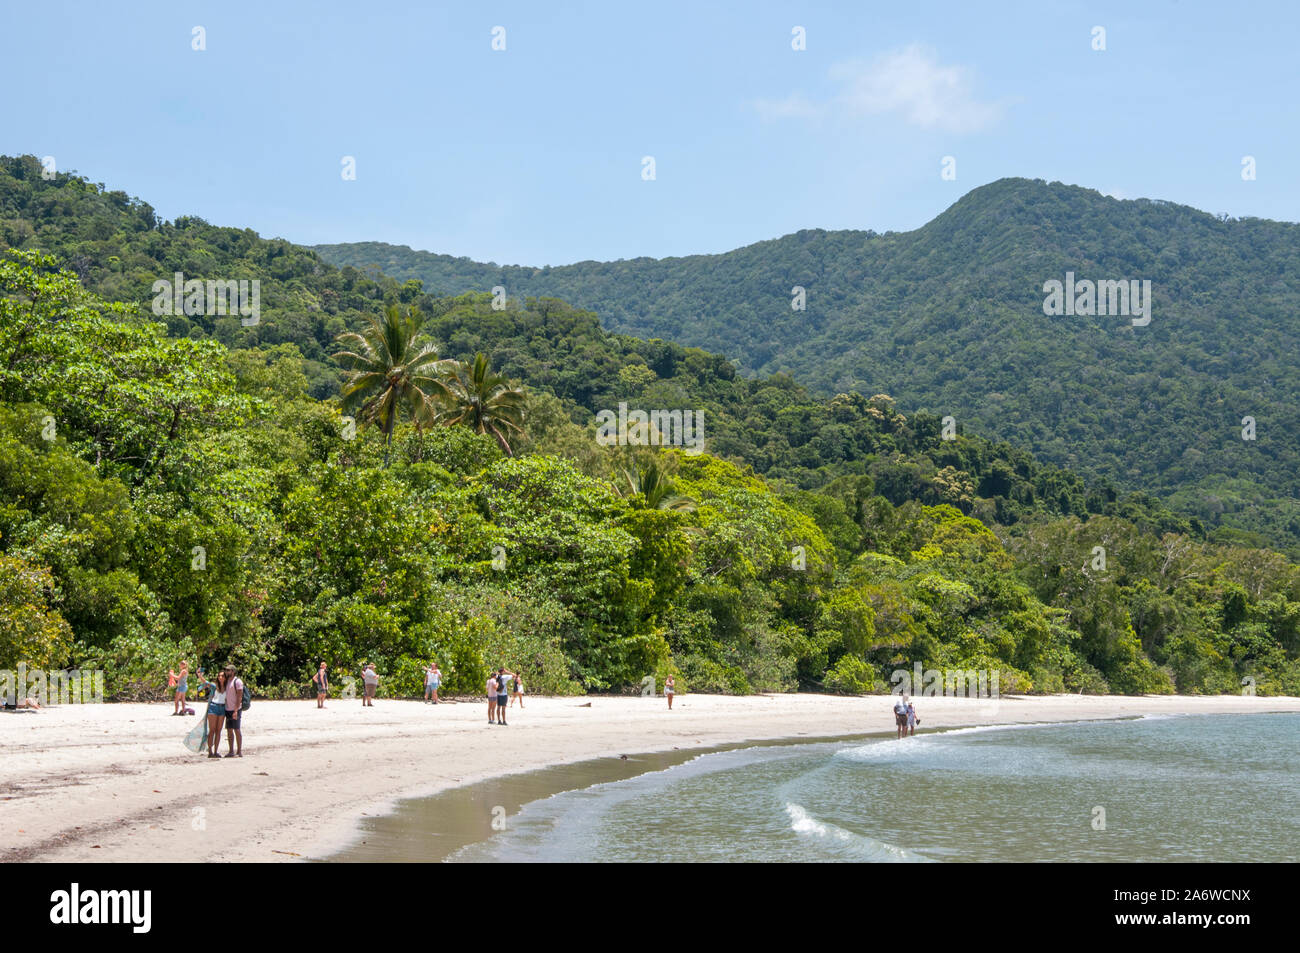 Beach at Cape Tribulation in the Daintree National Park, a World Heritage area in tropical North Queensland, Australia Stock Photo